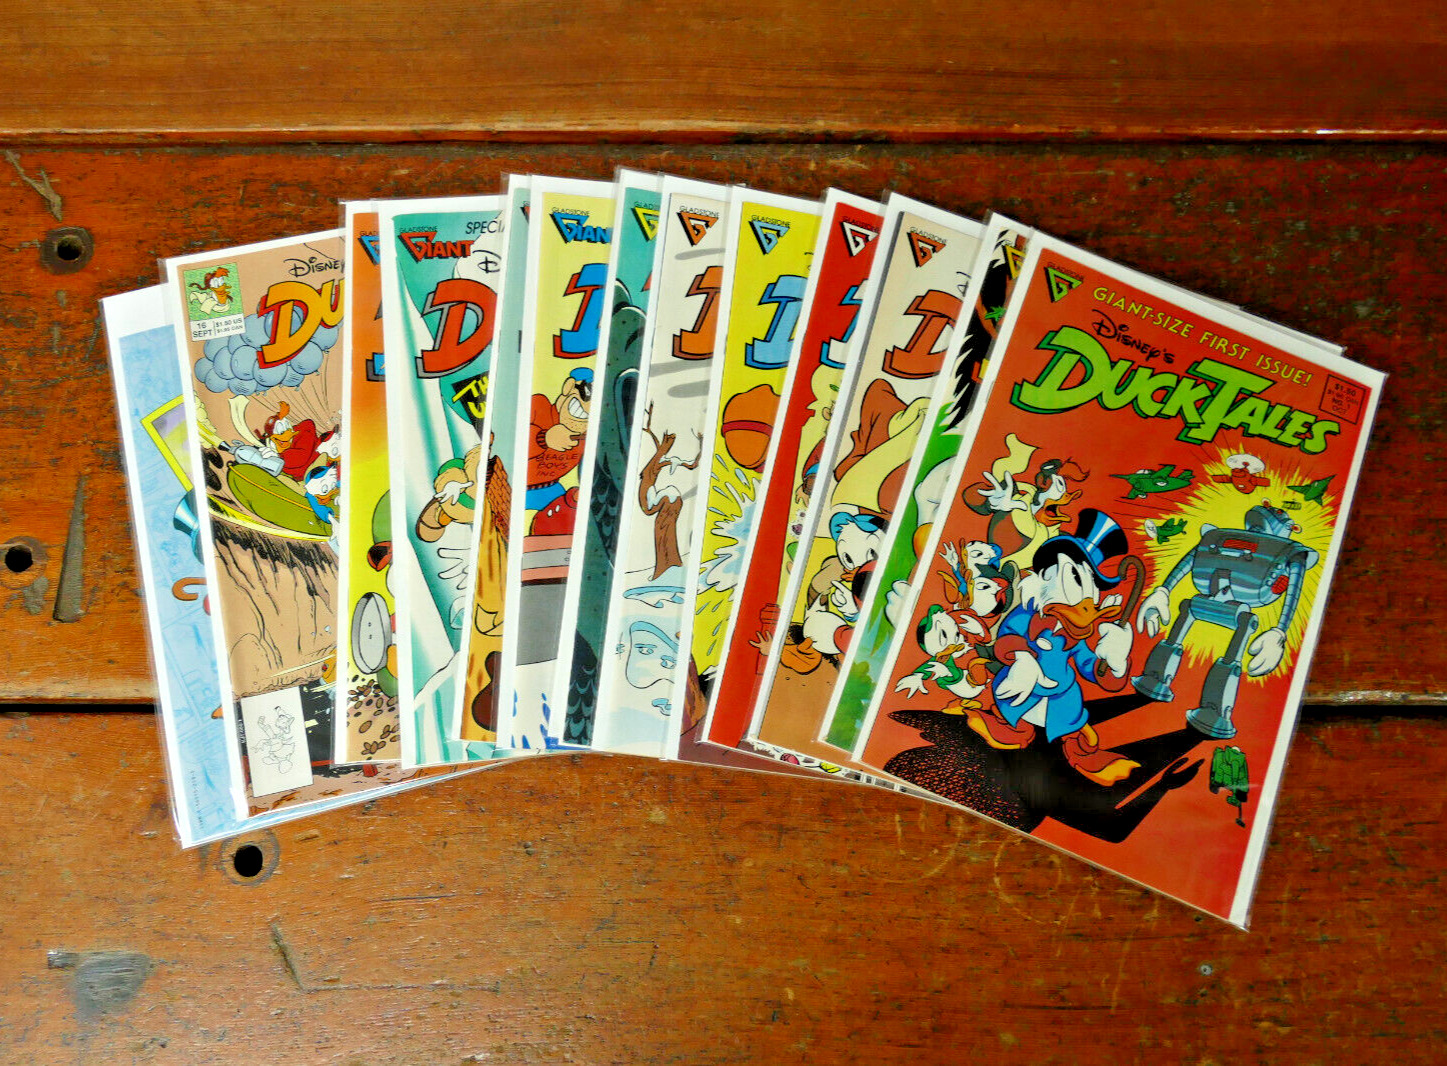 Disney's DuckTales #1-10, 12,13,16 (14 Issues) Gladstone 1988) - High Grade